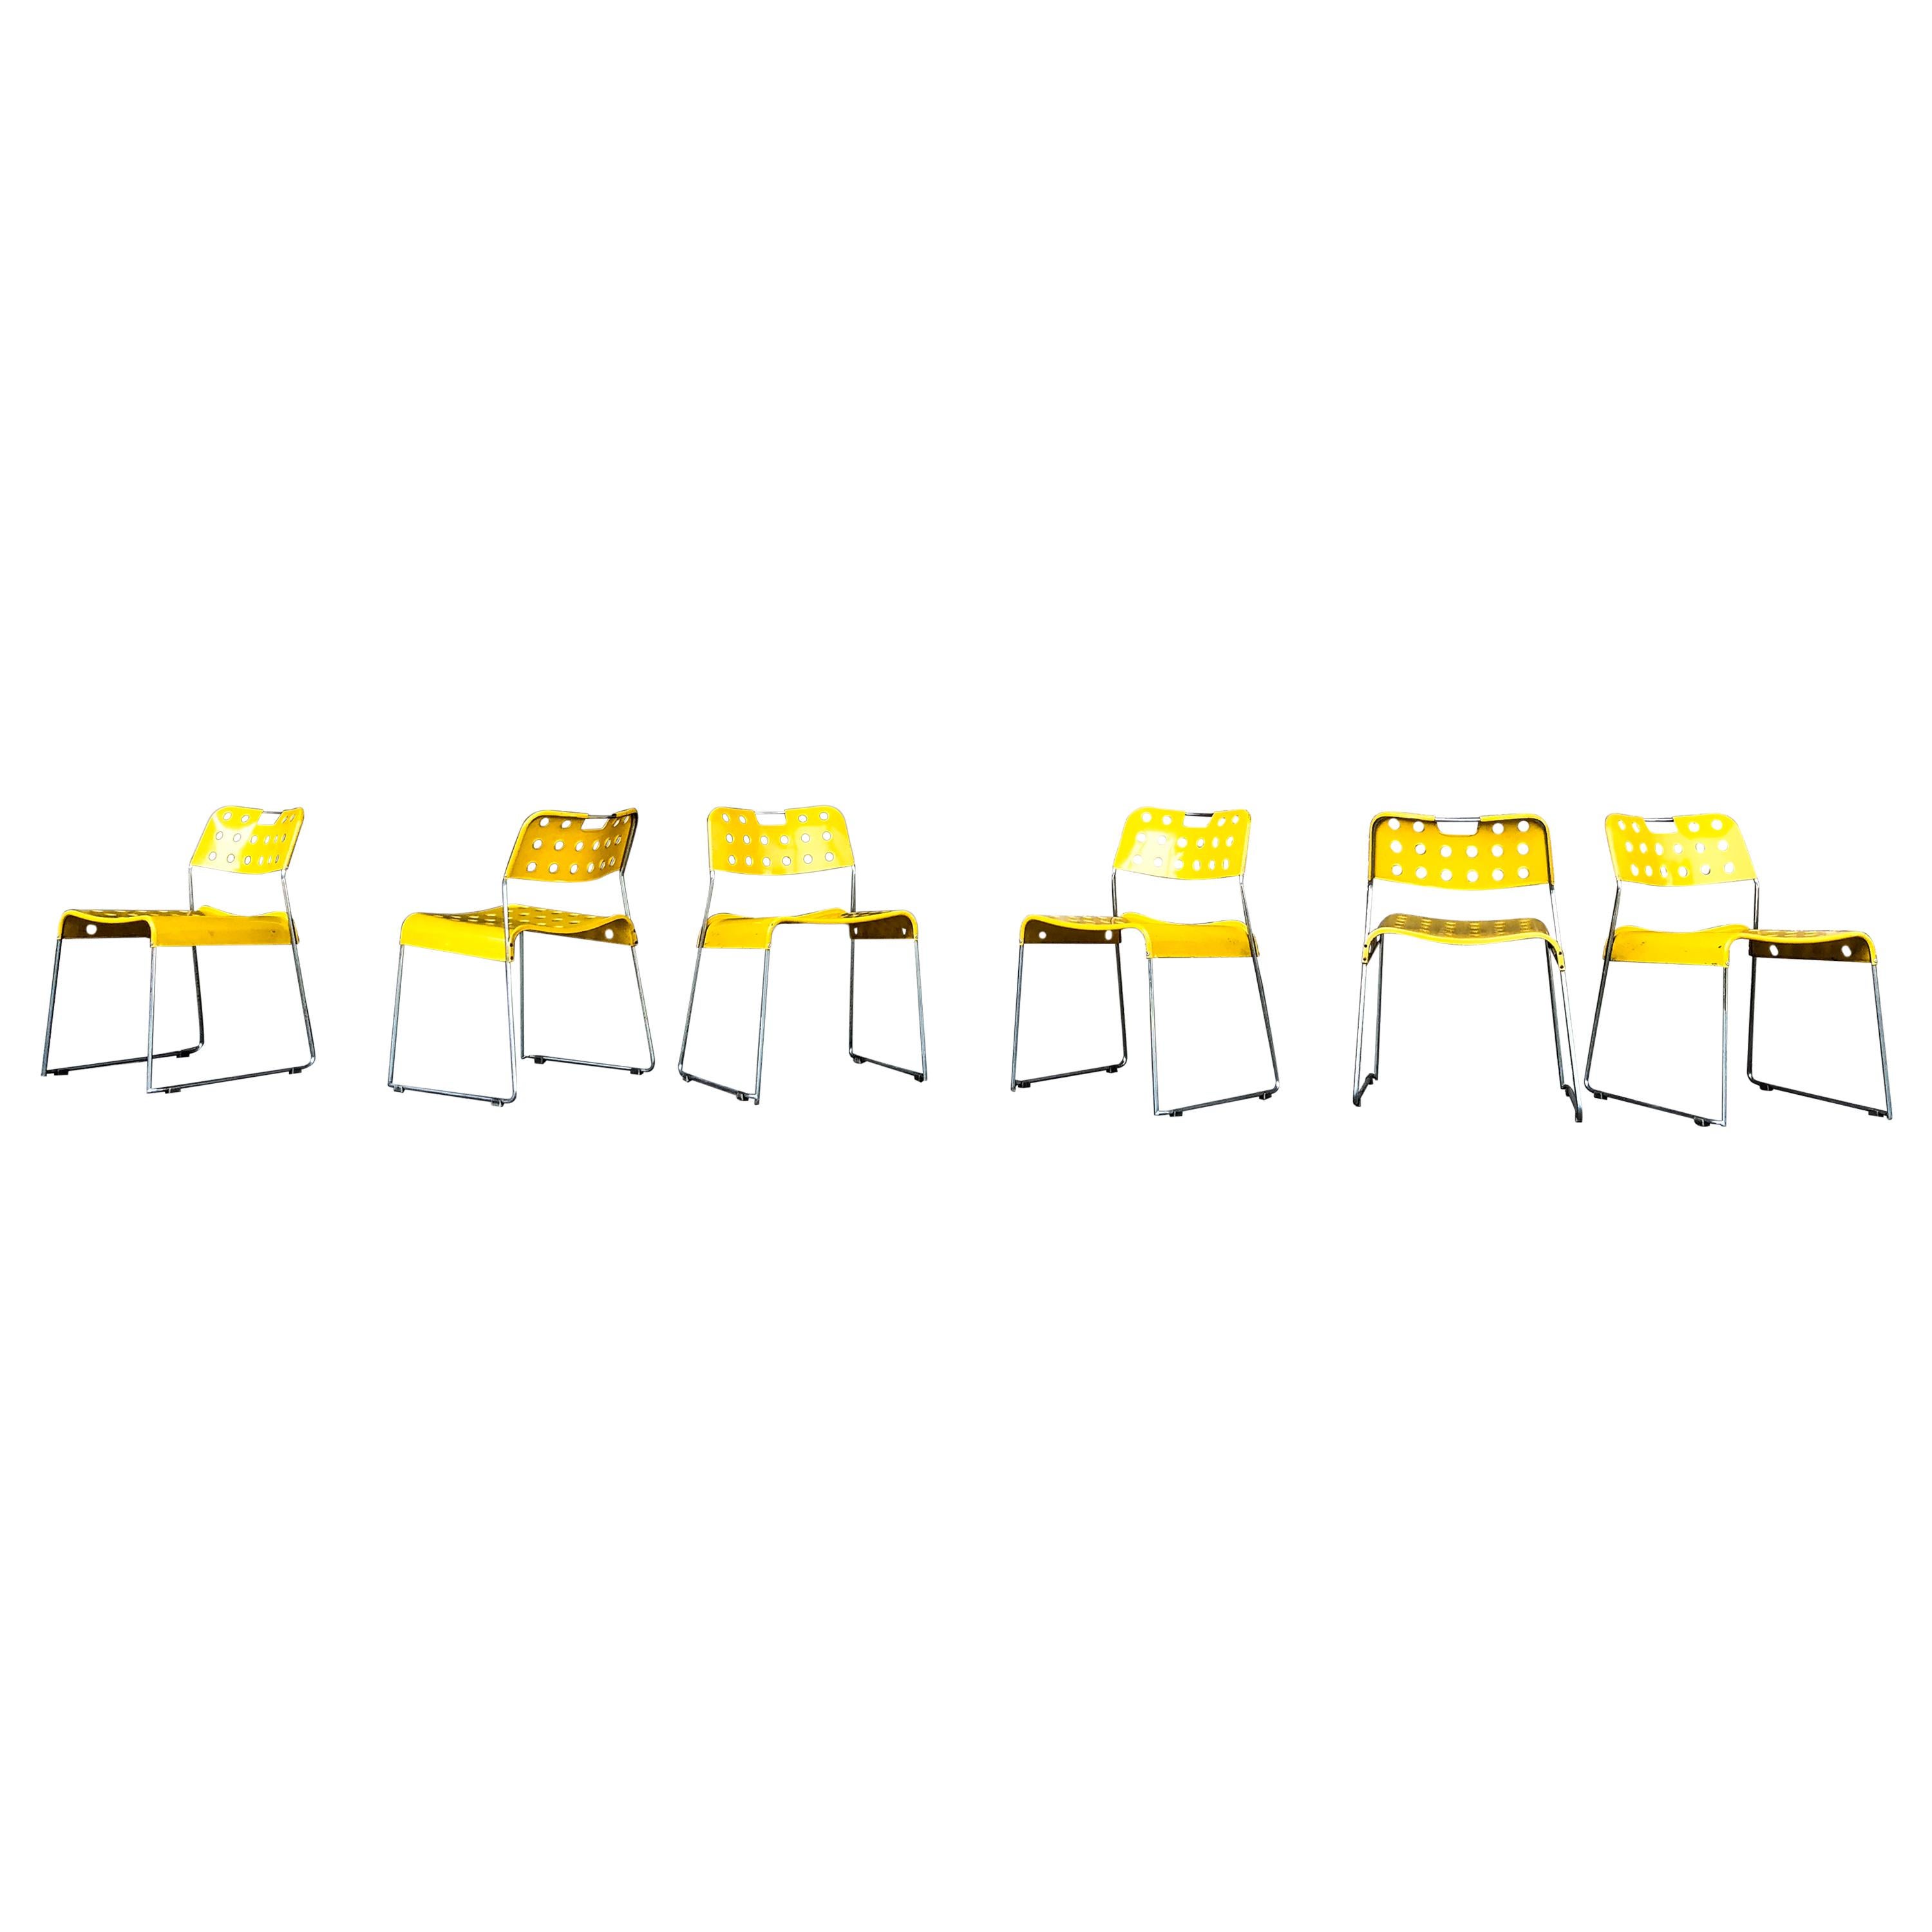 Late 20th Century Rodney Kinsman Space Age Yellow Omstak Chair for Bieffeplast, 1971, Set of 10 For Sale